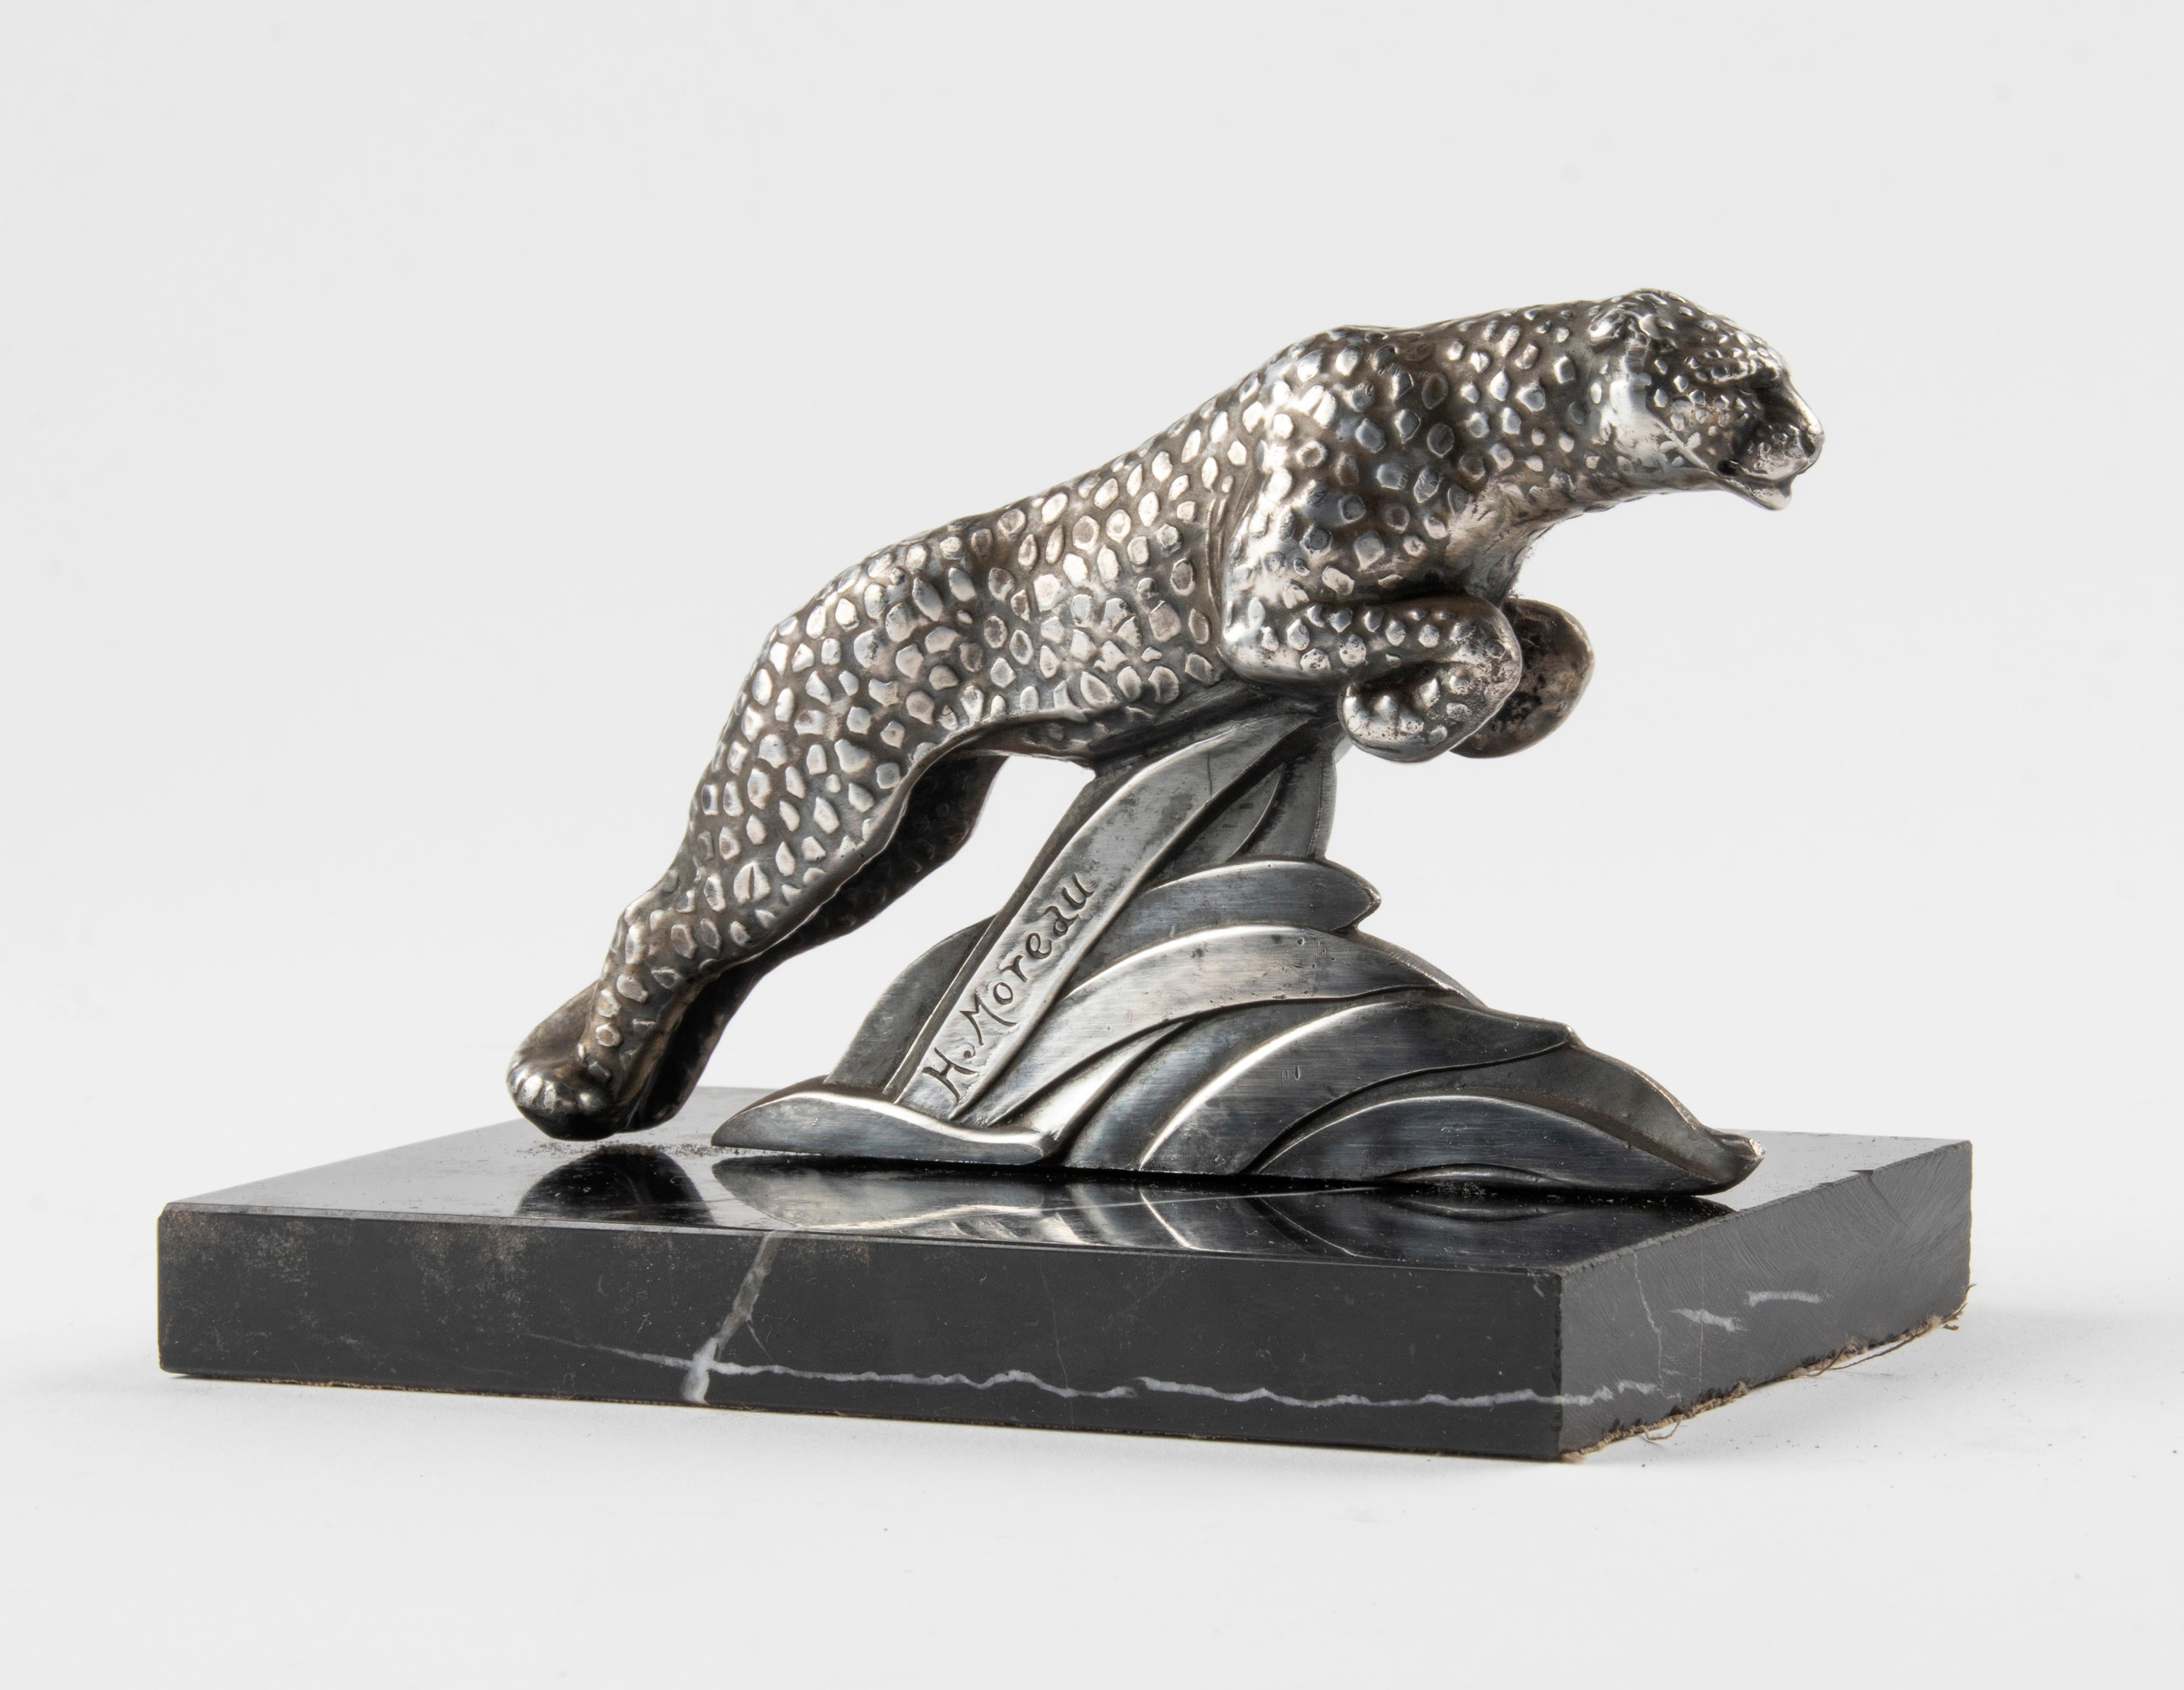 Stylish single Art Deco Book end with a spelter sculpture of a leopard. The figurine is patinated in a silver color and stands on a black marble base. Signed 'H. Moreau'.